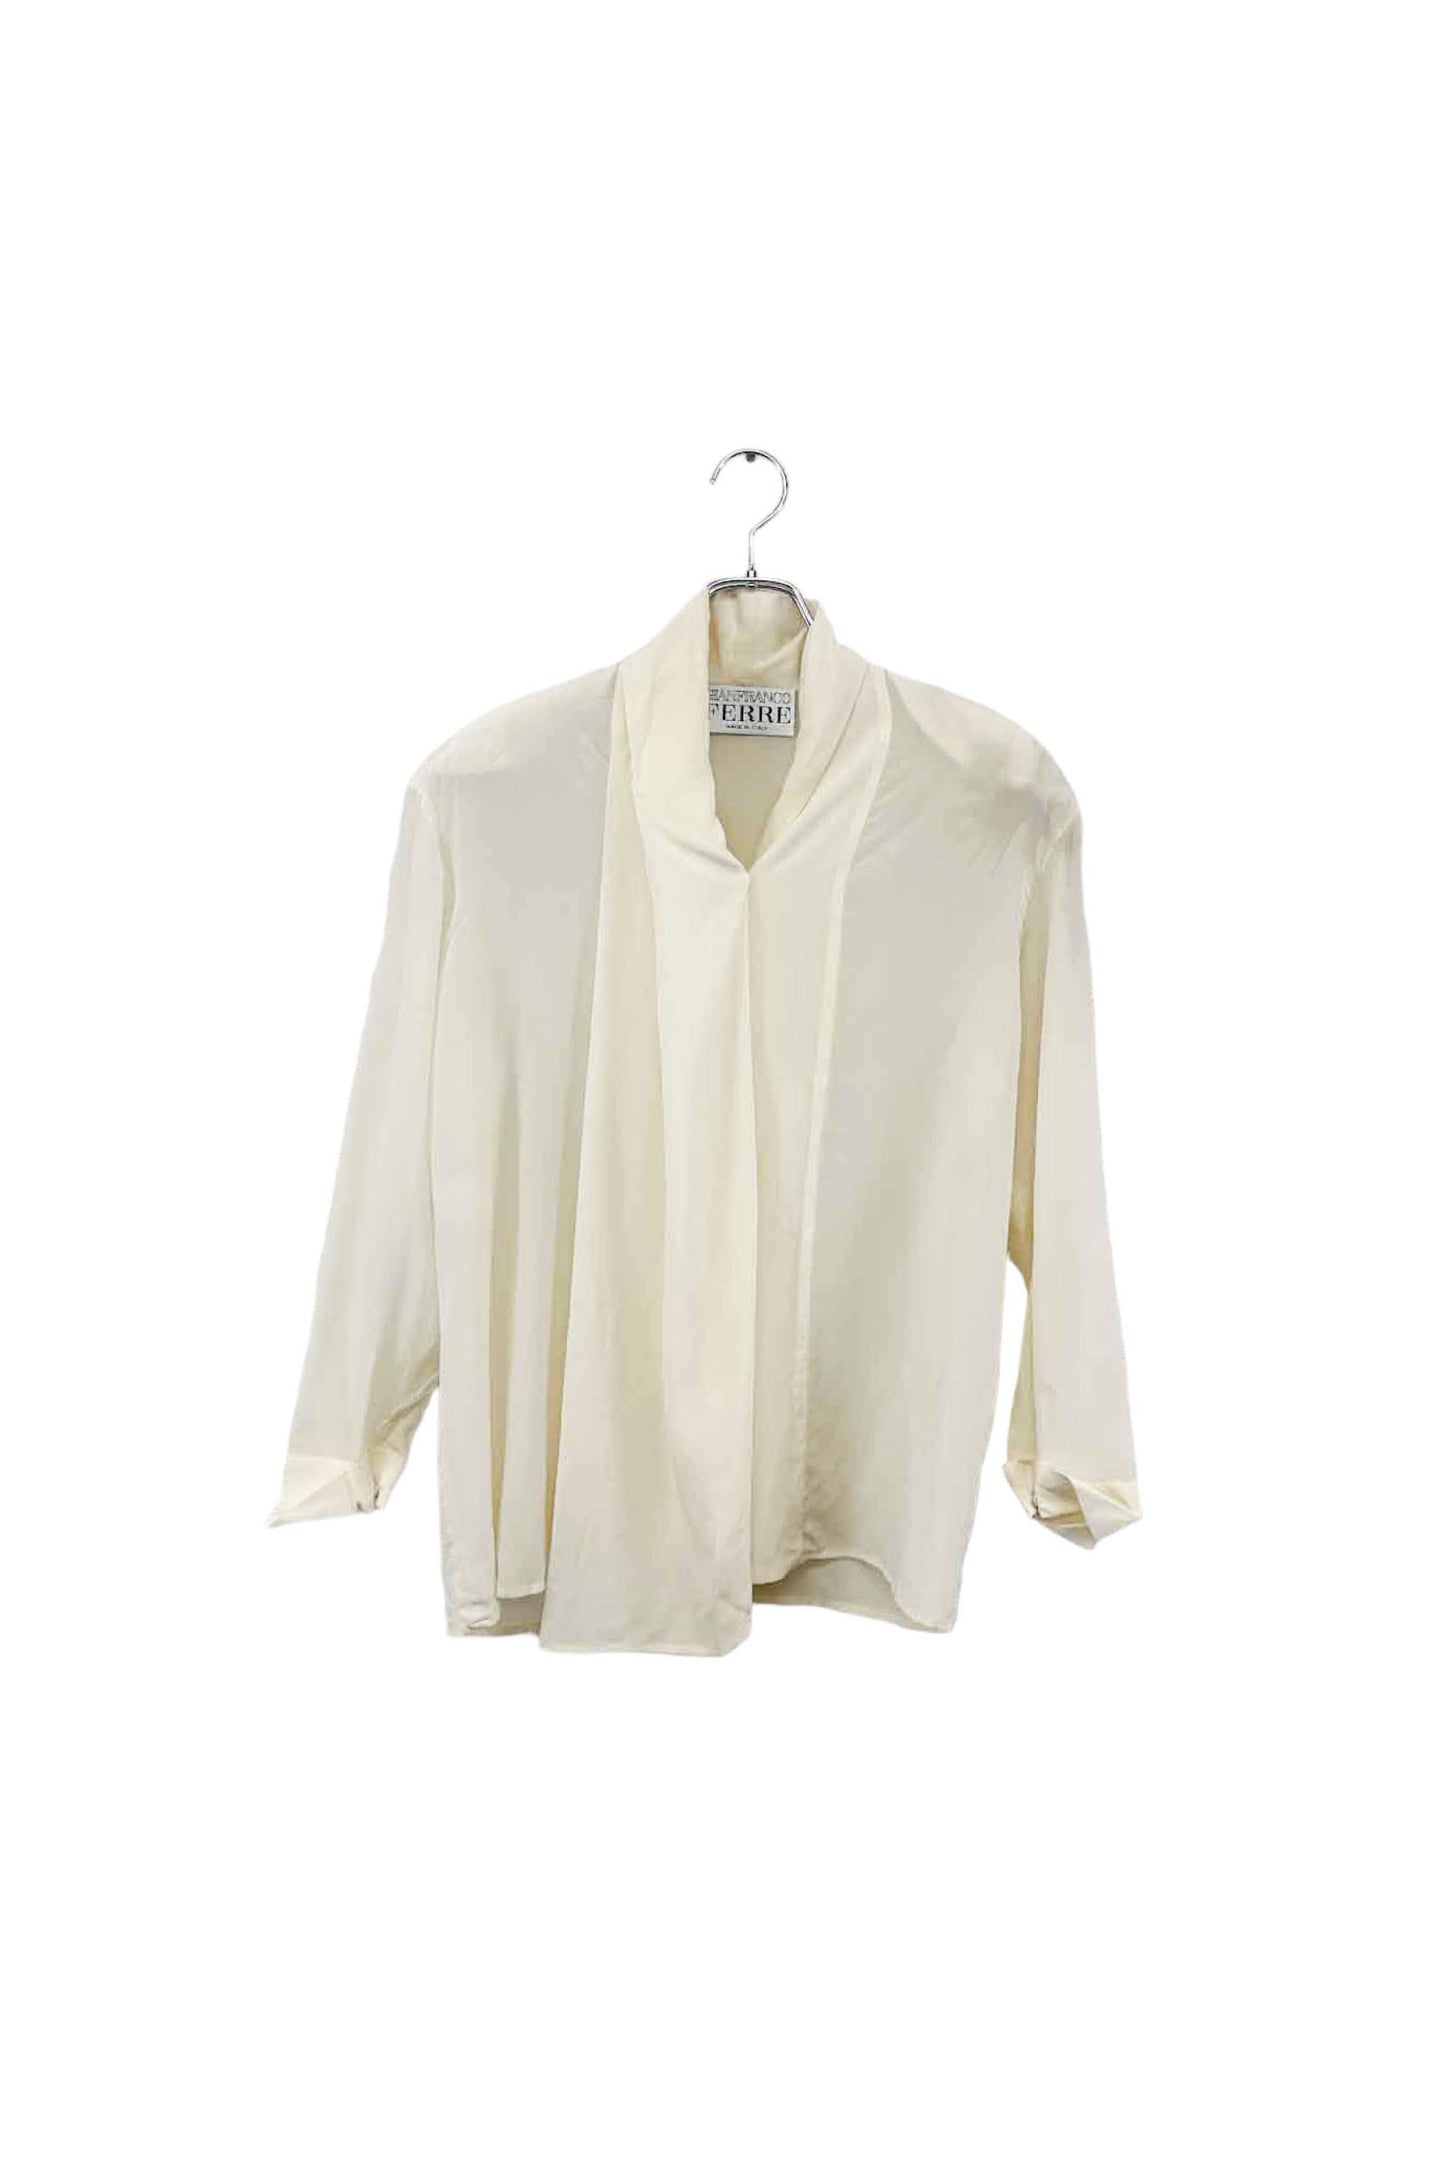 Made in ITALY GIANFRANCO FERRE silk blouse